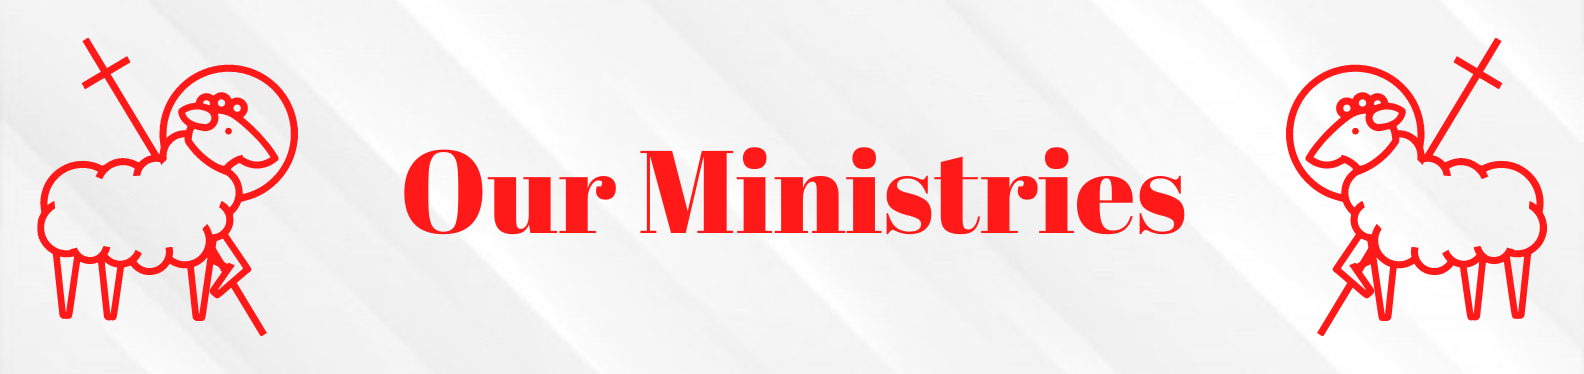 The word Ministries written in red writing with a clipart image of a lamb with a spear in a red outline one on each side of the word.